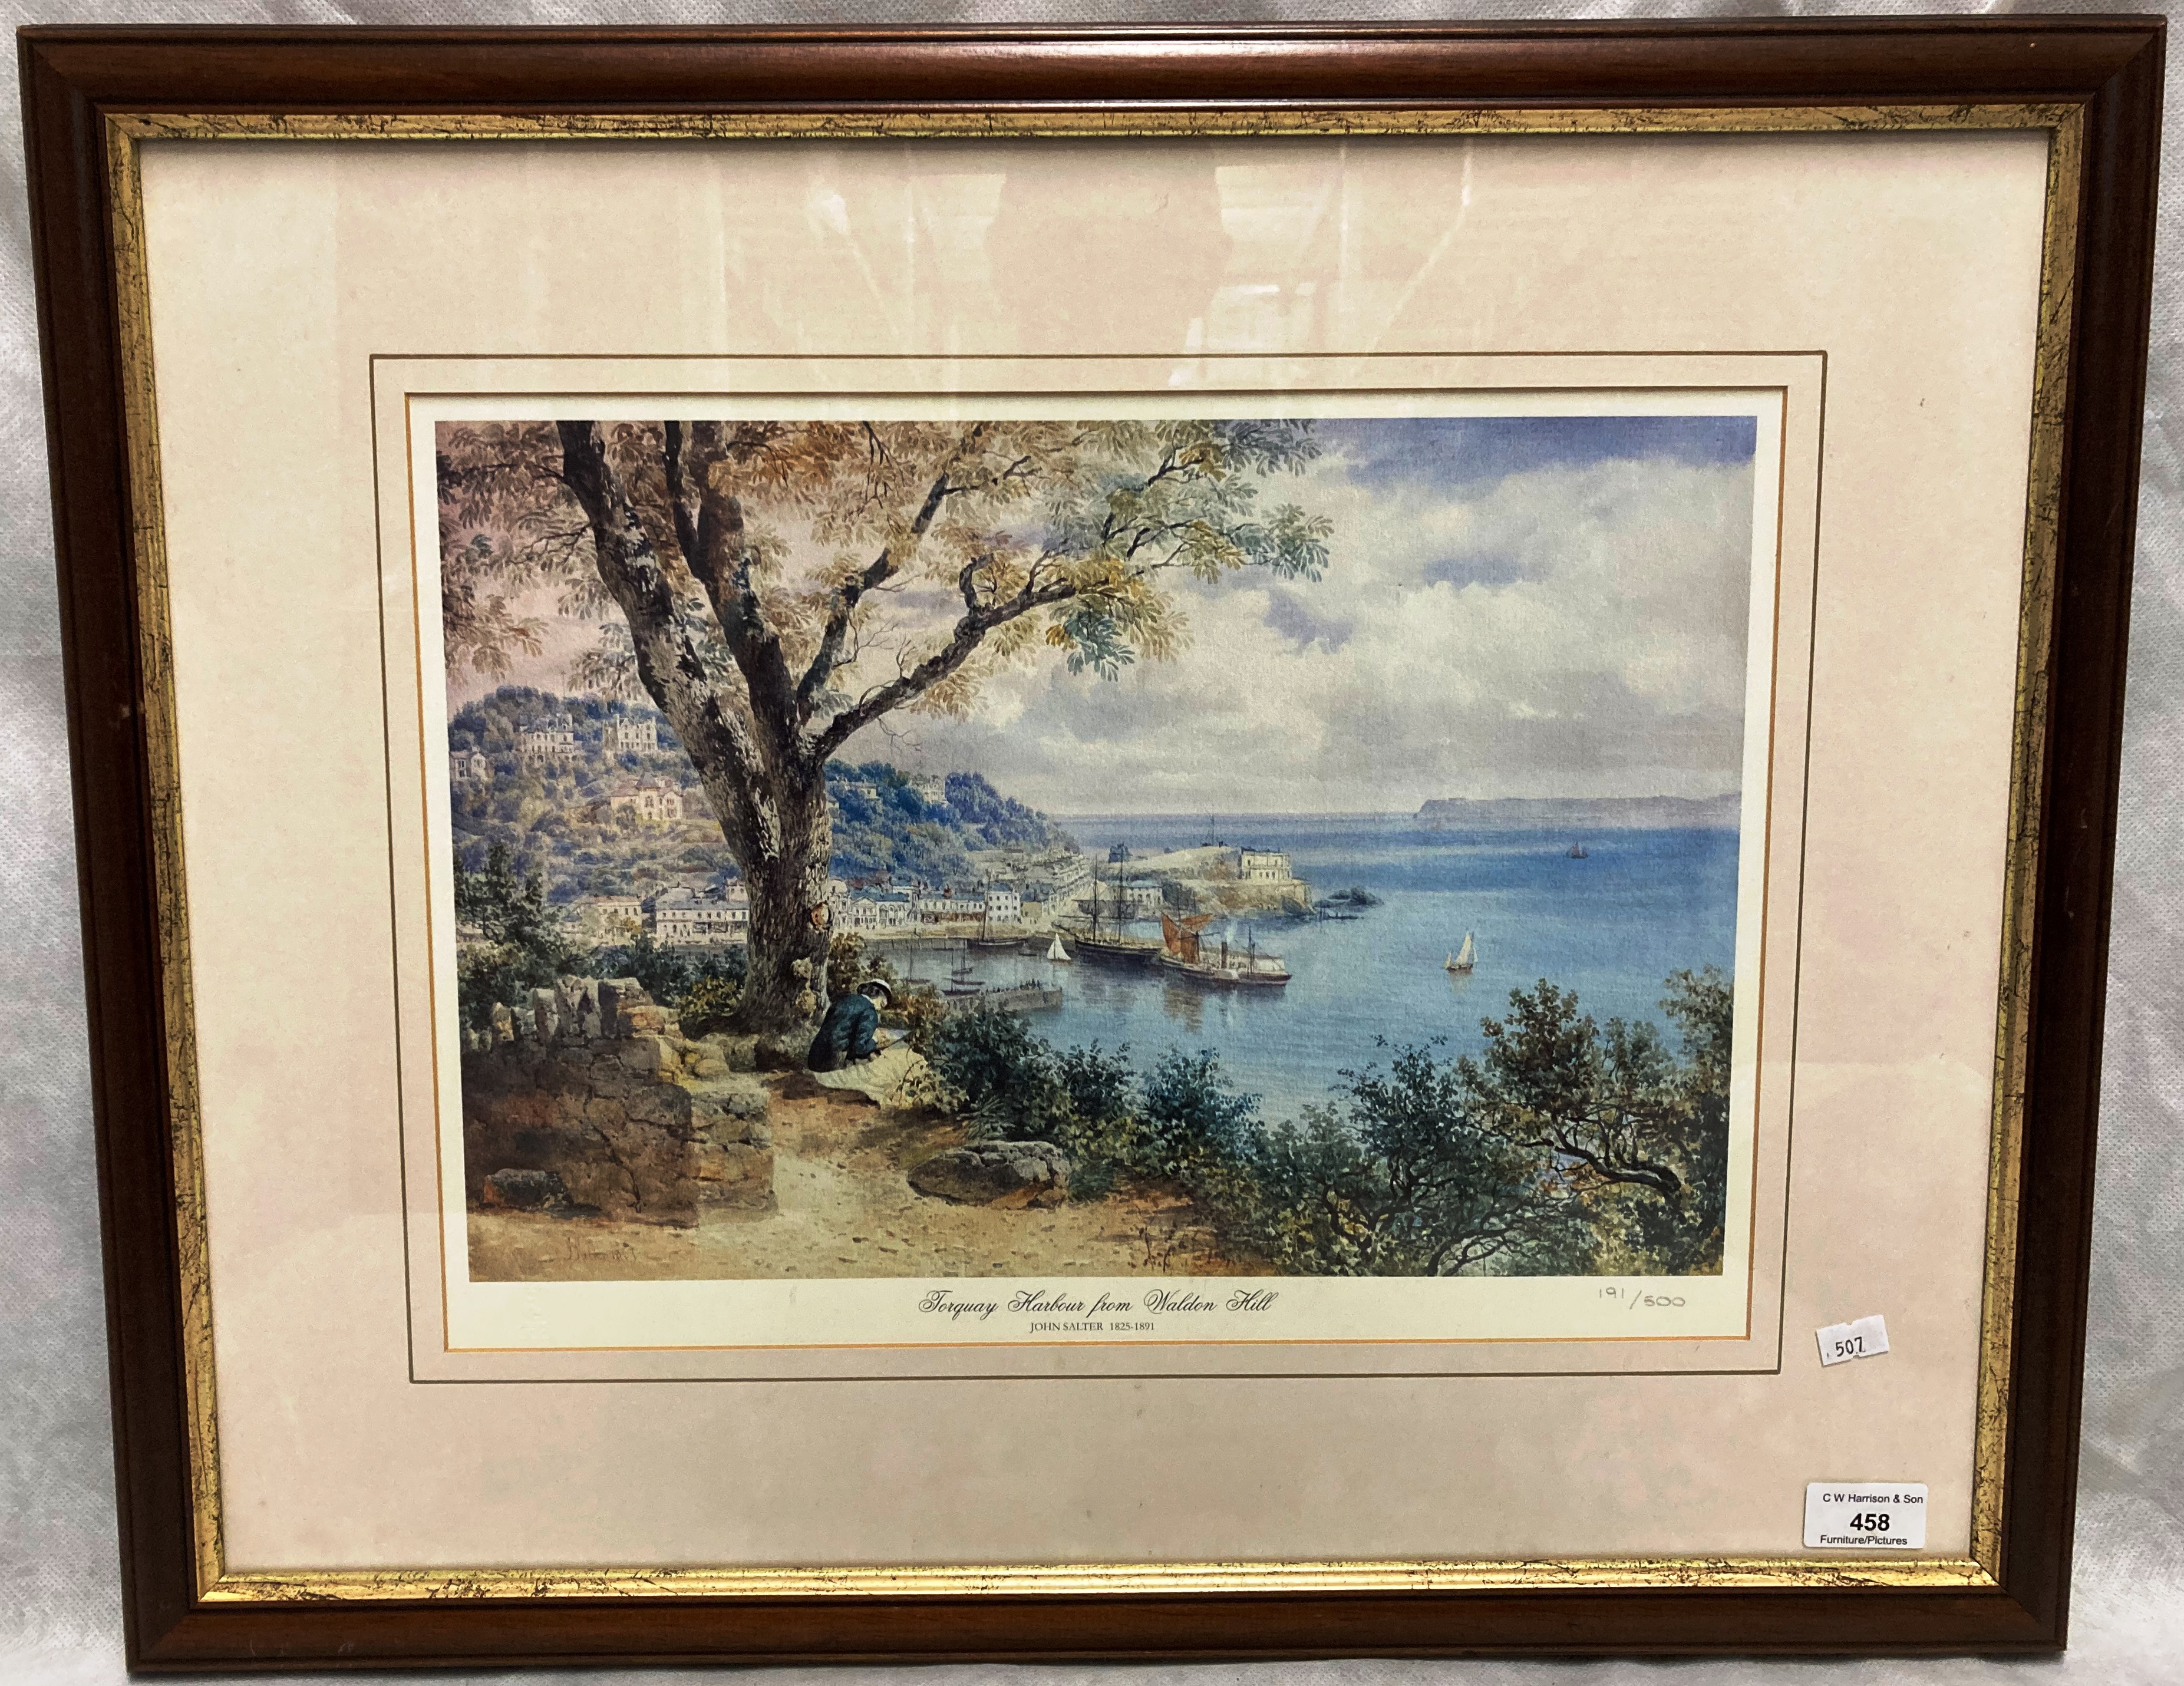 John Salter 1825-1891 Limited Edition framed print 'Torquay Harbour from Waldon Hill' 191/500 -